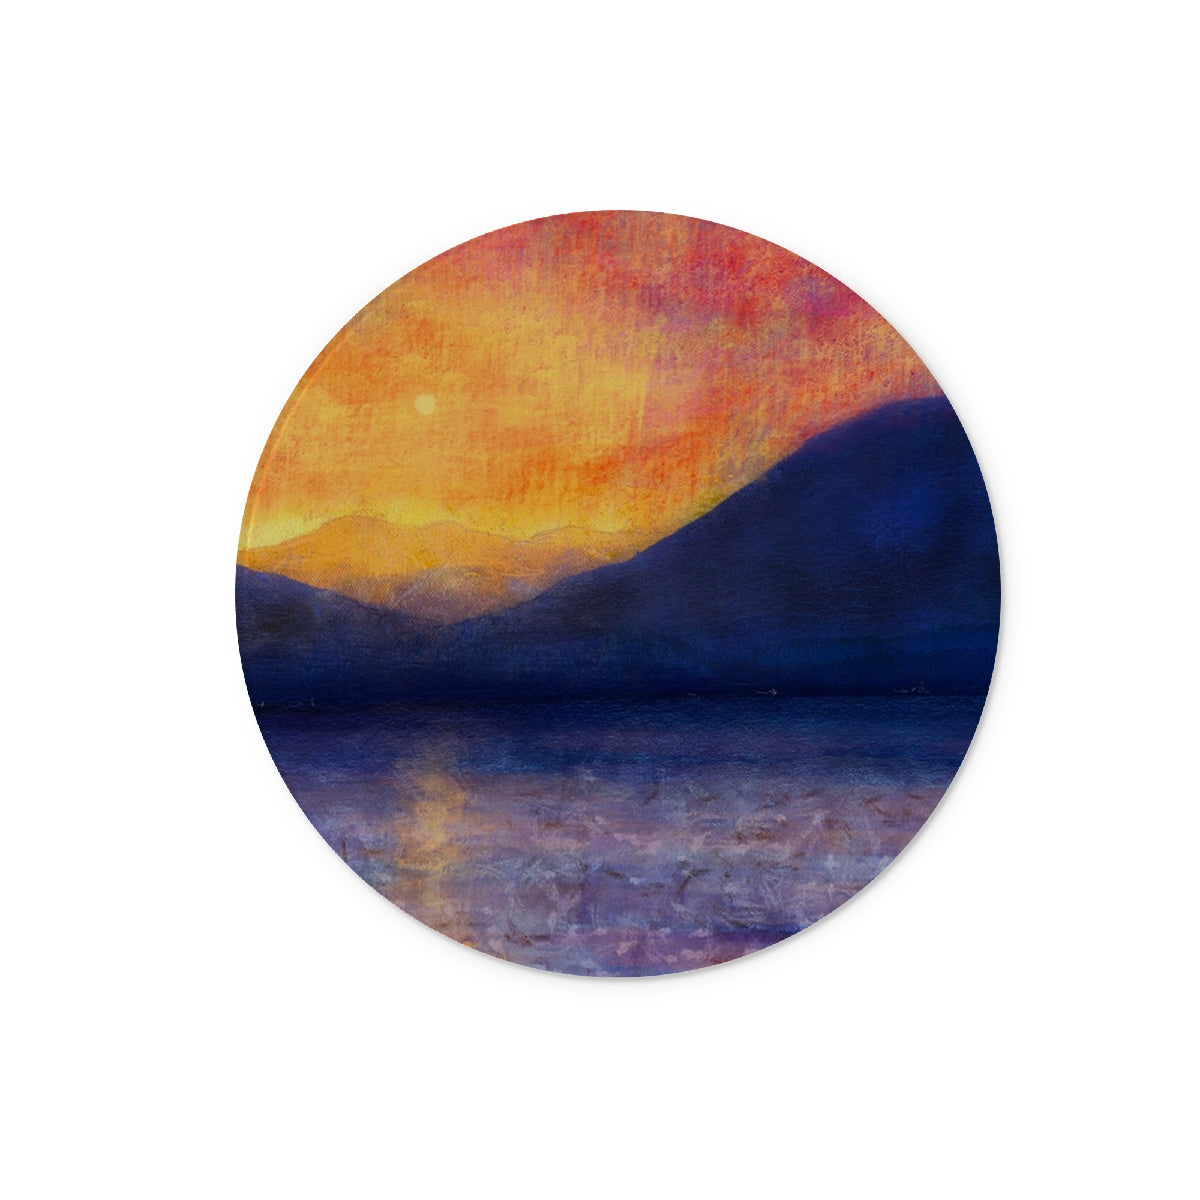 Sunset Approaching Mull Art Gifts Glass Chopping Board-Glass Chopping Boards-Hebridean Islands Art Gallery-12" Round-Paintings, Prints, Homeware, Art Gifts From Scotland By Scottish Artist Kevin Hunter